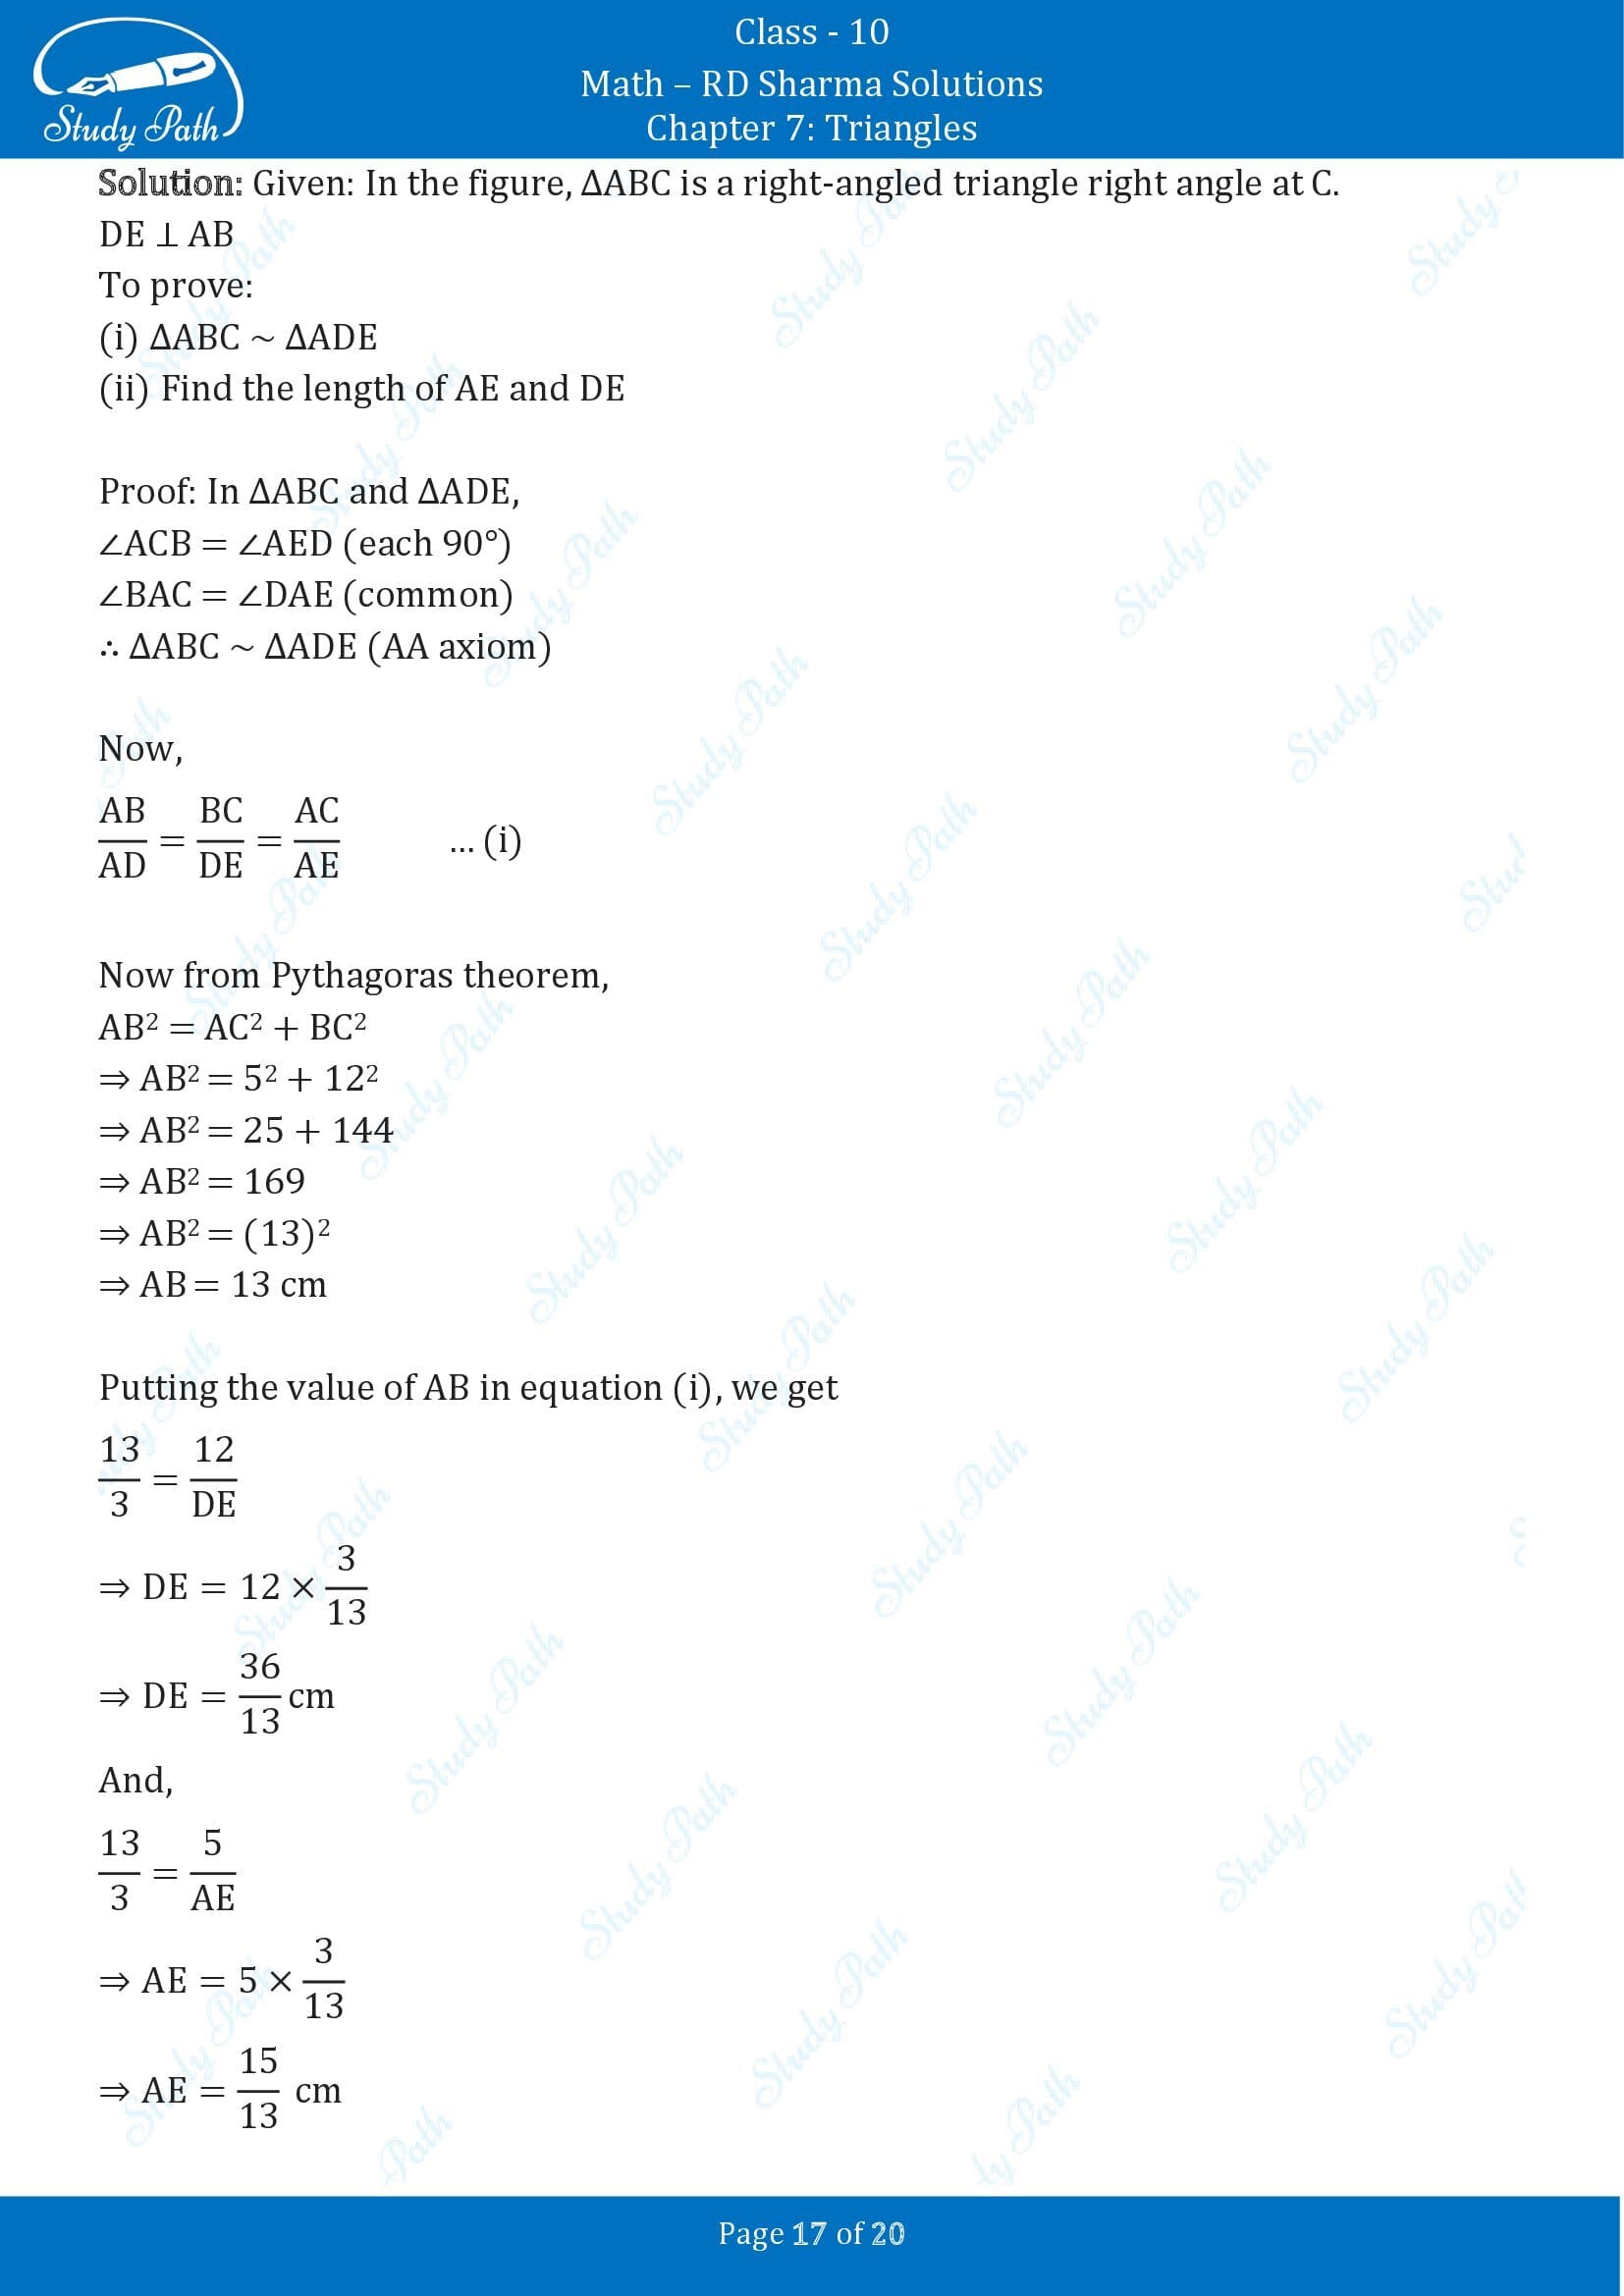 RD Sharma Solutions Class 10 Chapter 7 Triangles Exercise 7.5 00017